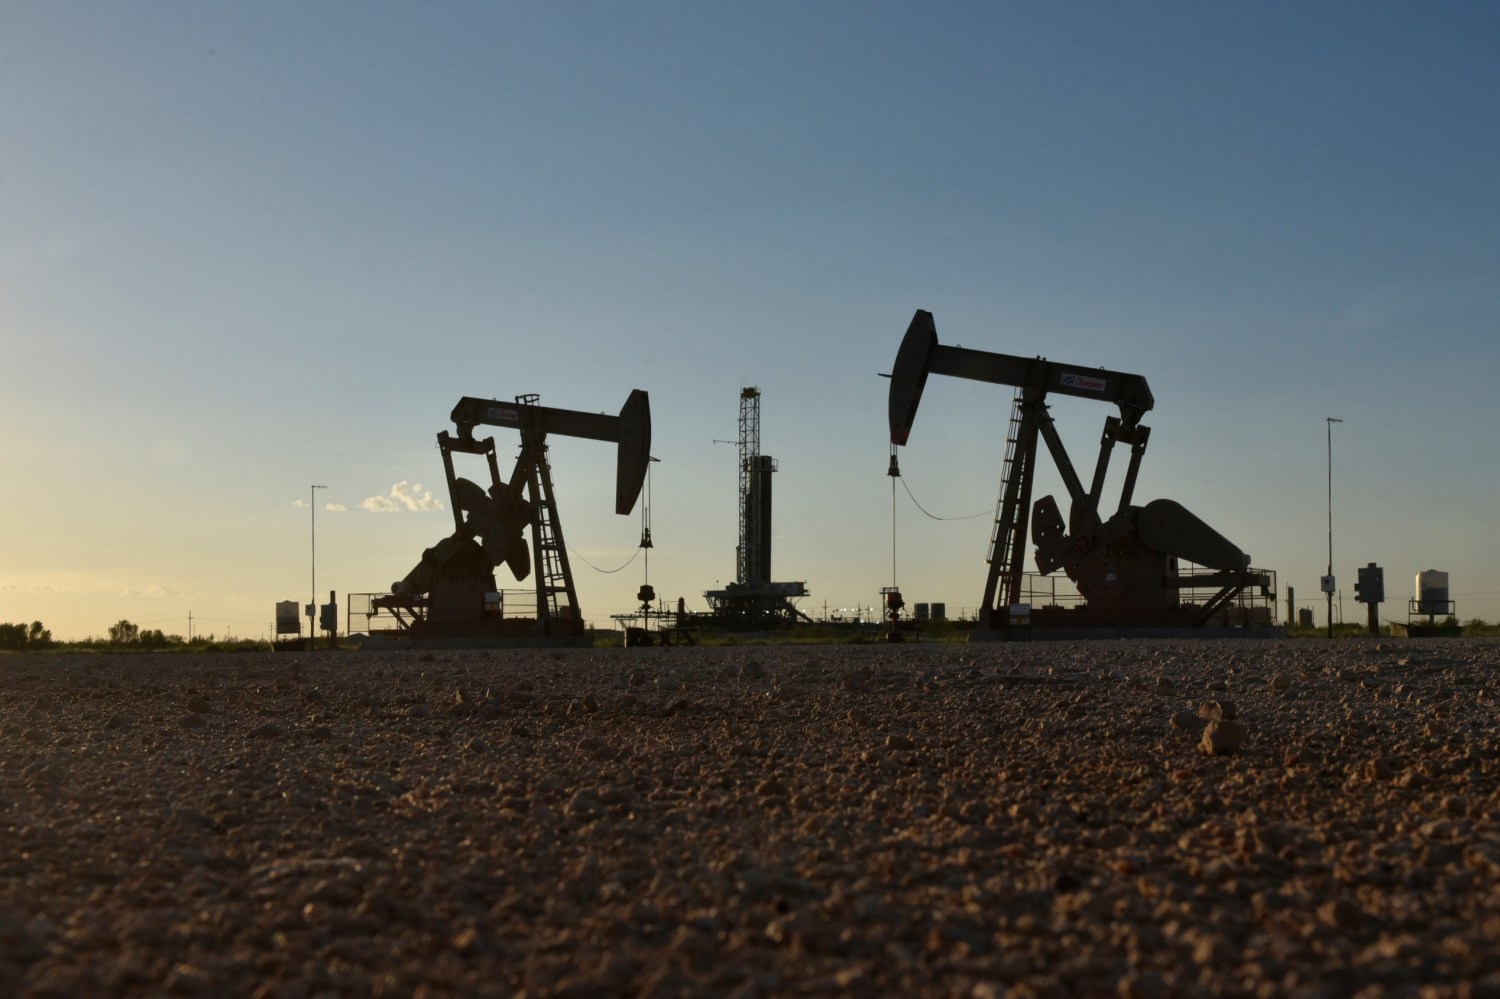 Pump jacks operate in front of a drilling rig in an oil field in Midland, Texas U.S. August 22, 2018. Picture taken August 22, 2018. REUTERS/Nick Oxford - RC1B5EE7E390